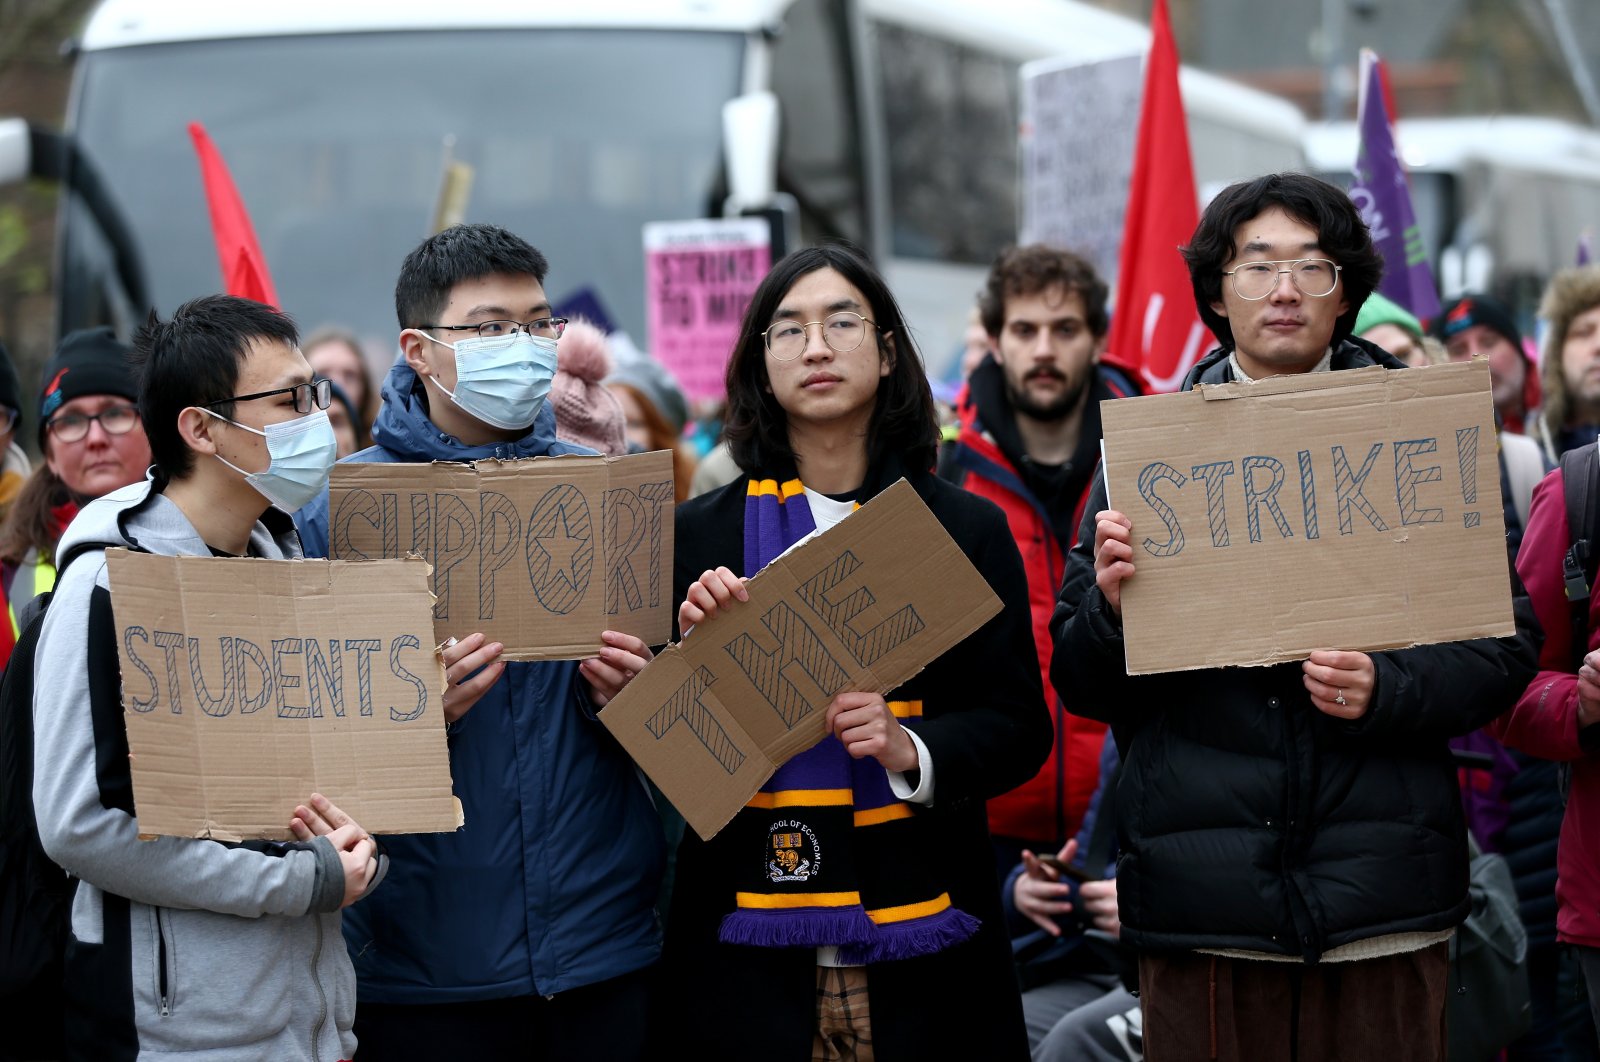 University and College Union (UCU) members take part in a "march for higher education" in Leeds, U.K., Nov. 30, 2022. (EPA Photo)